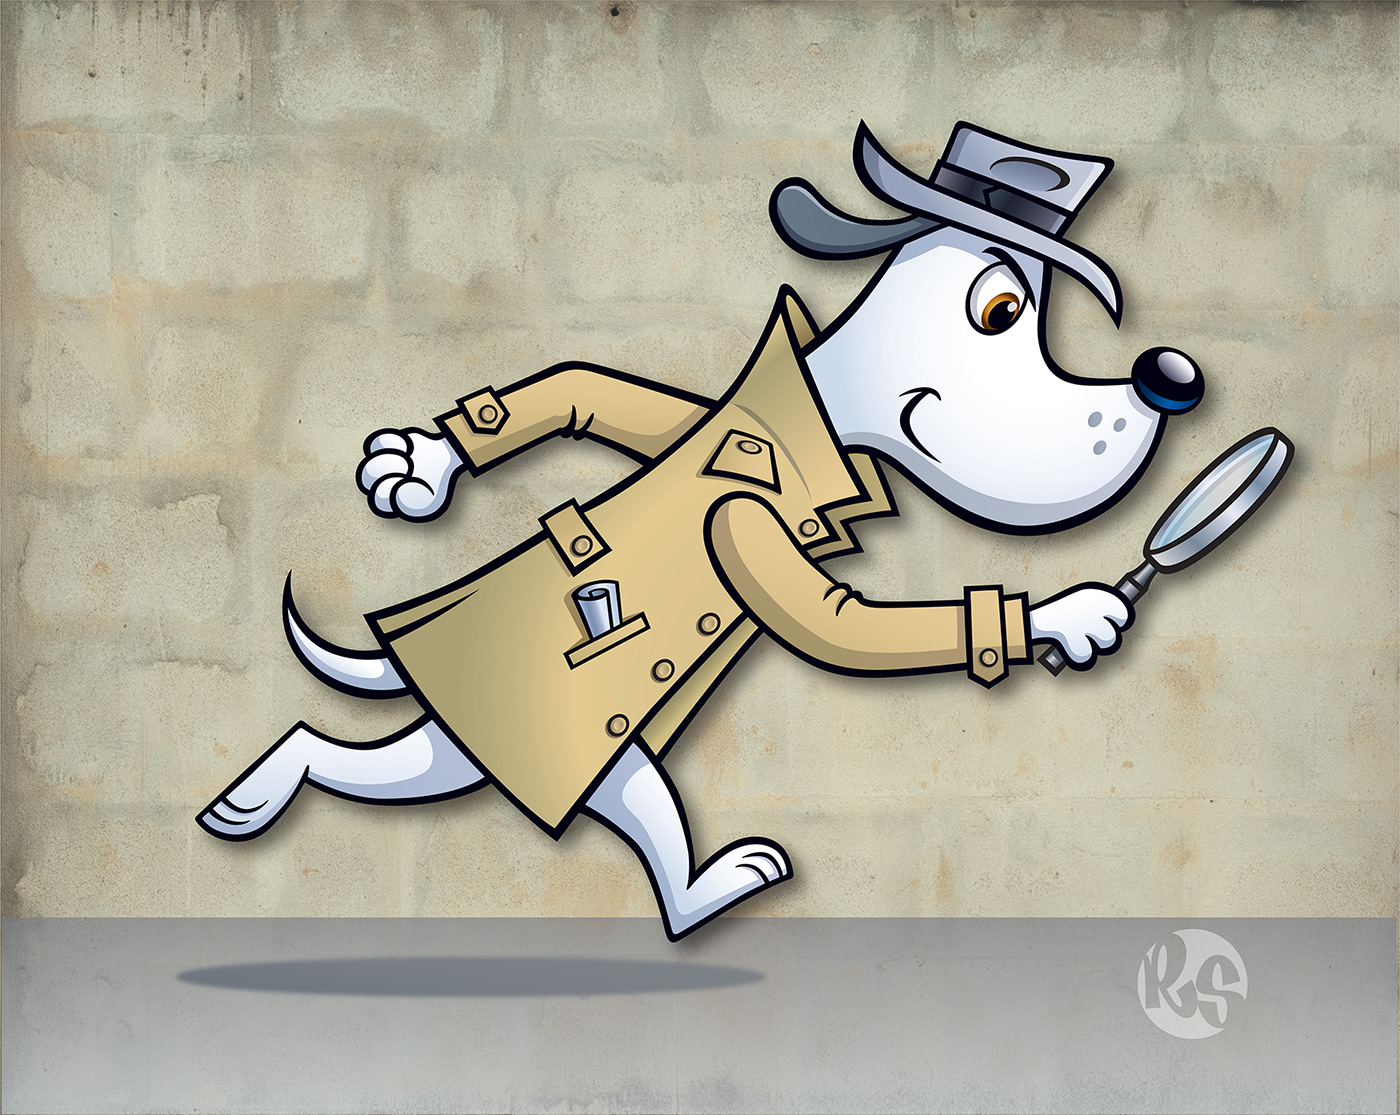 Mutt hound detective investigation comic cartoon silly funny cute dog